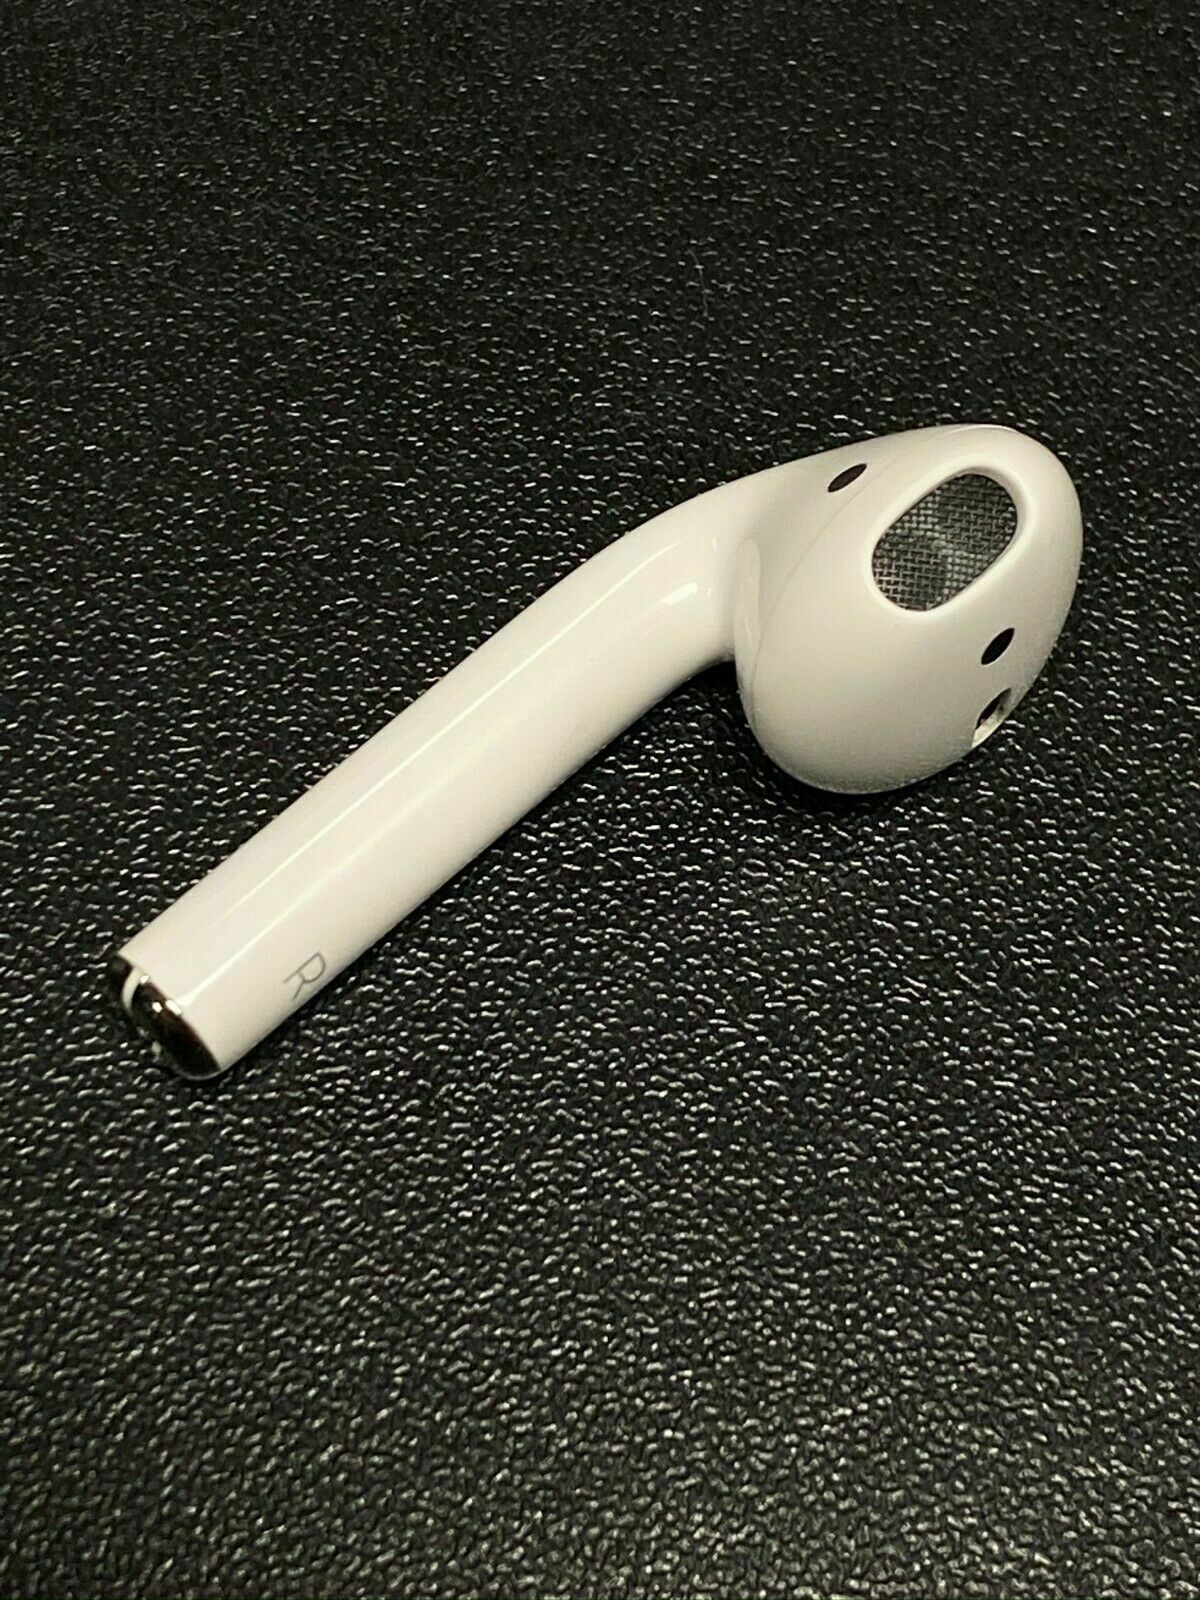 Apple Airpods Right Only (airpod) - Replacement - 100% Authentic 2nd Generation